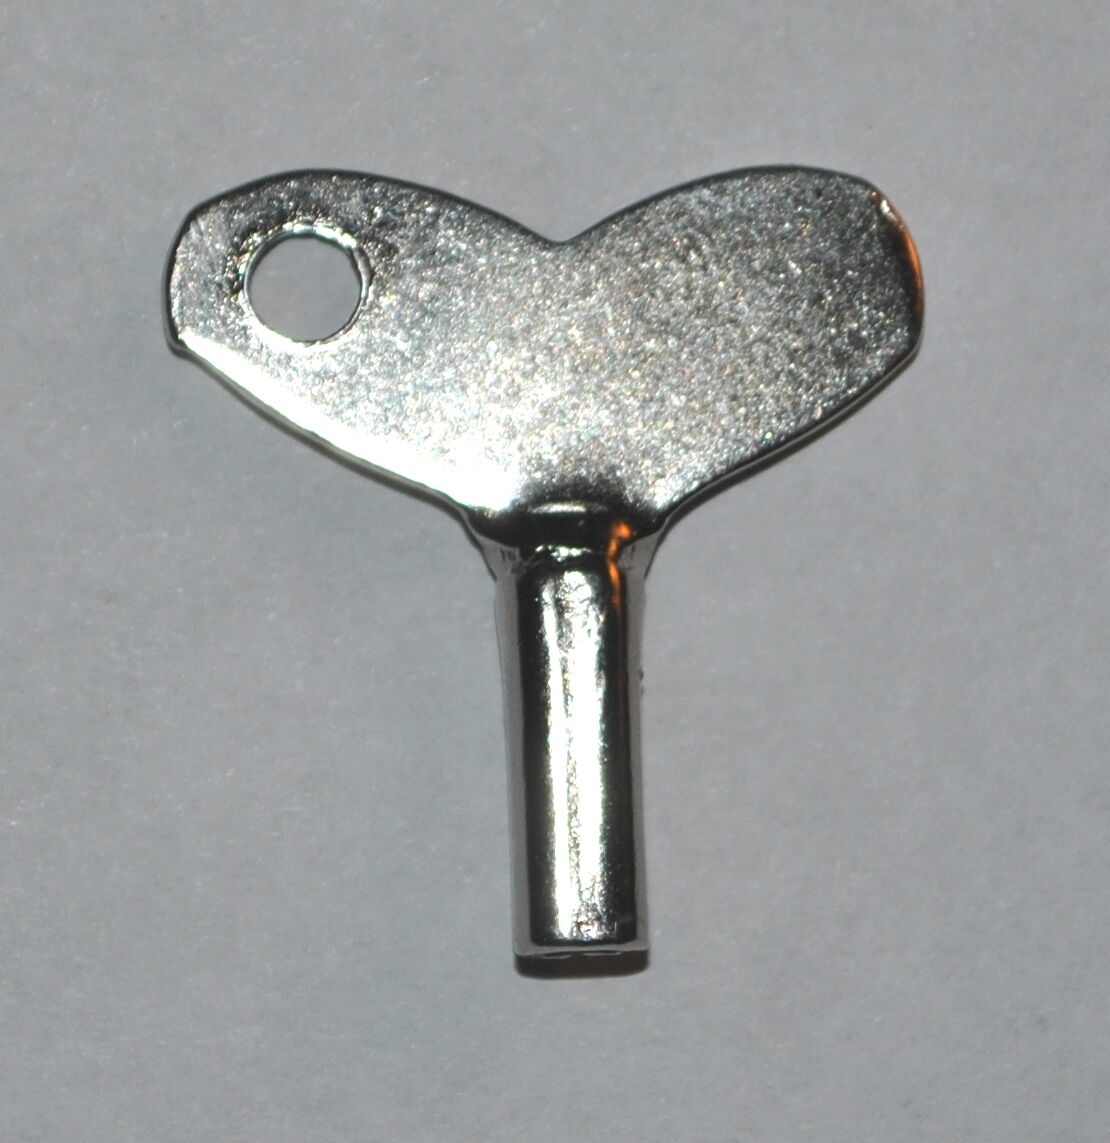 Replacement Wind-up Key Fits Most Vintage Mechanical Toys - Free Shipping!!